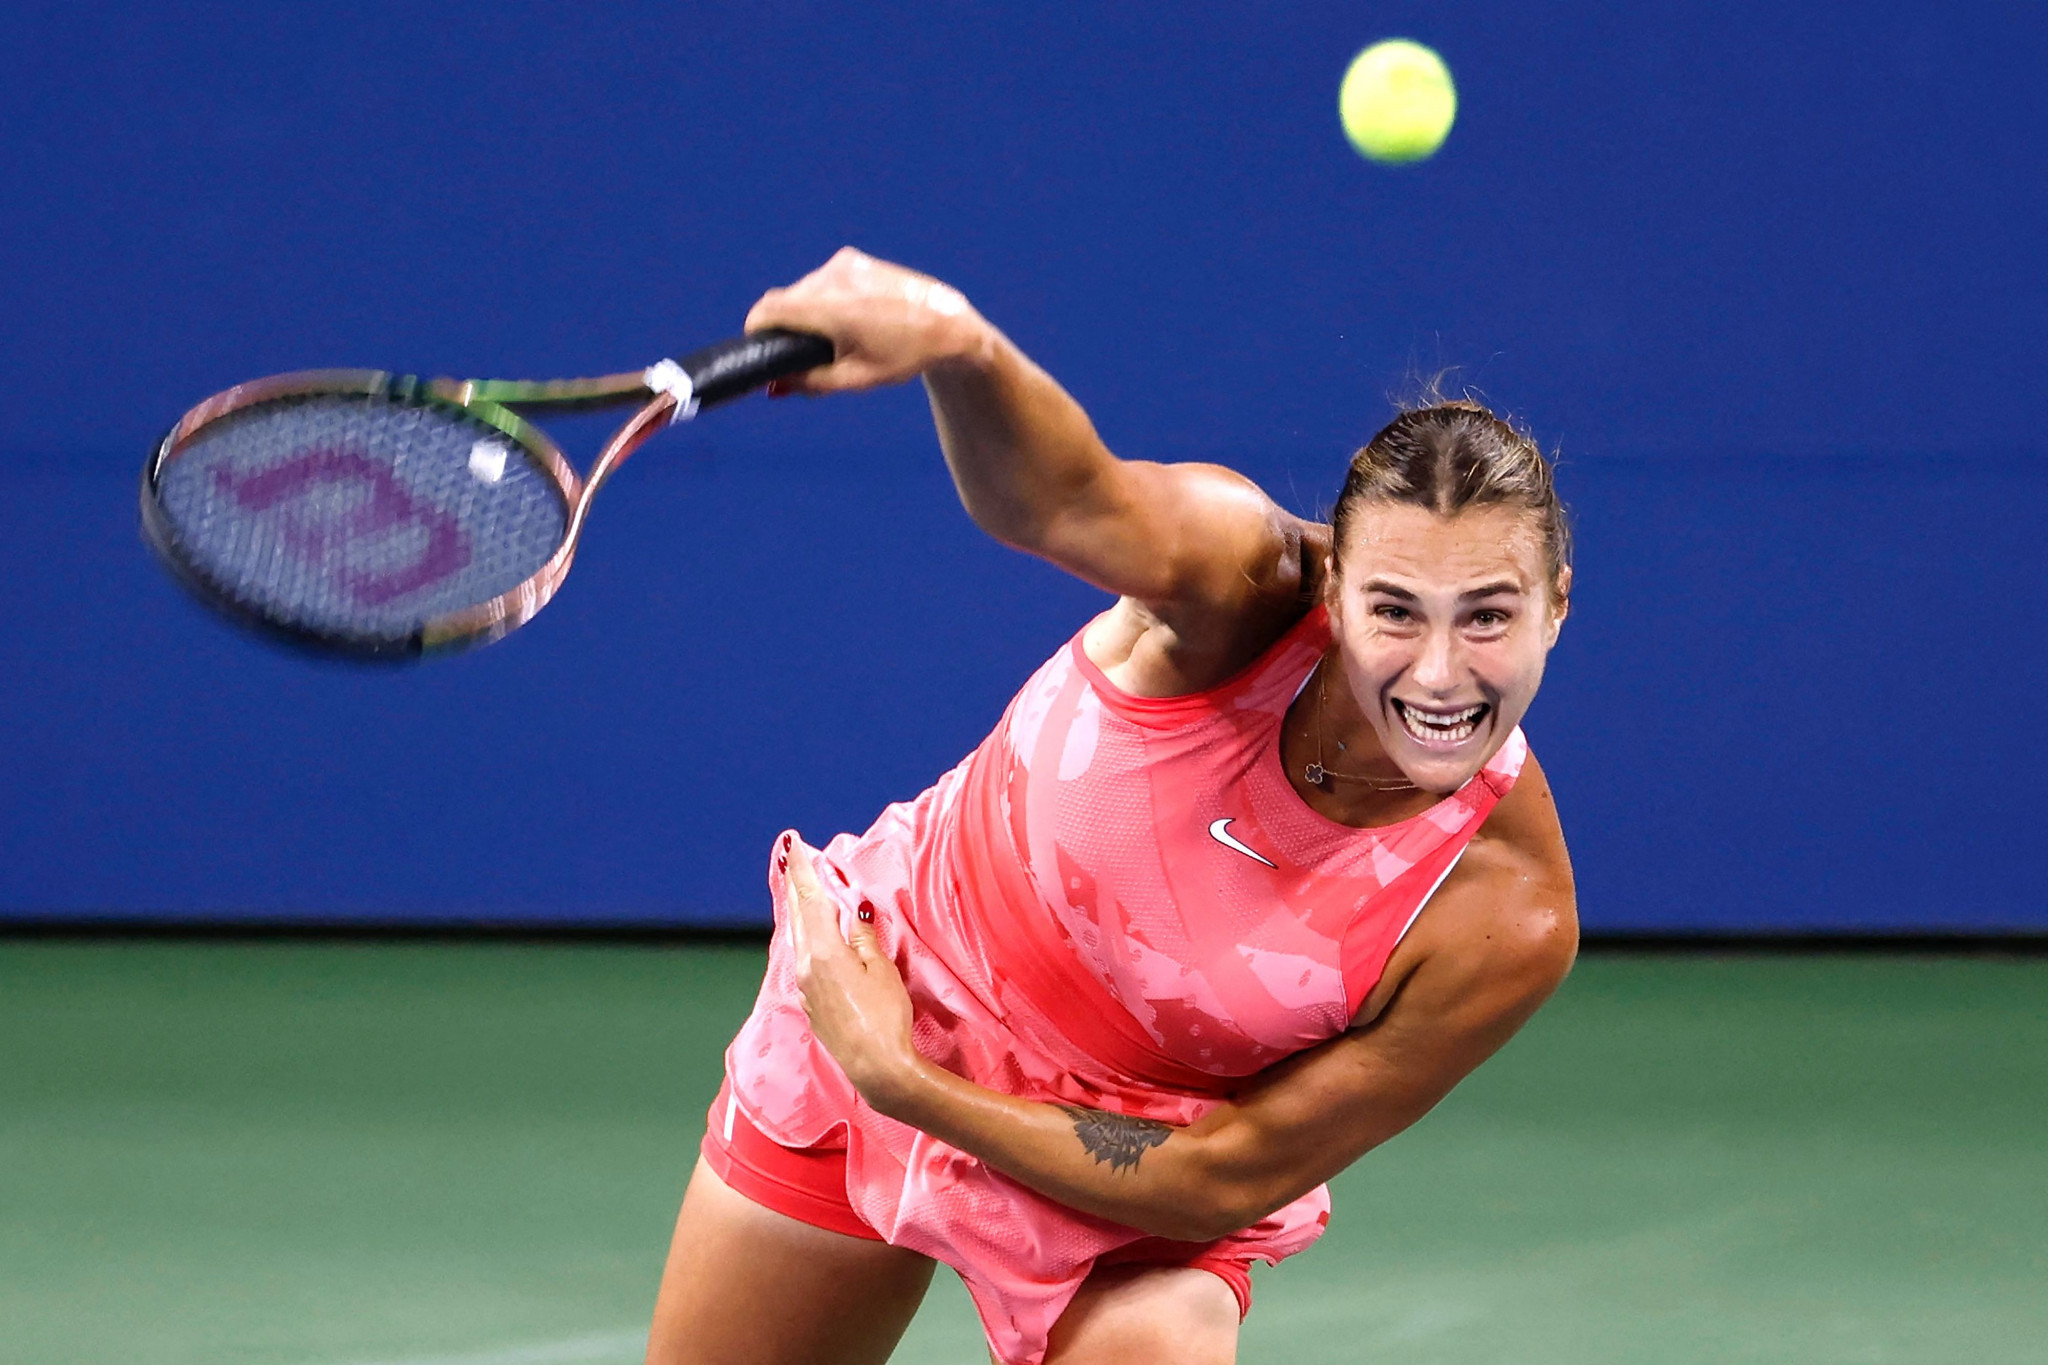 Belarusian neutral Aryna Sabalenka progressed to the second round of the US Open against Belgium's Maryna Zanevska, a Ukrainian-born player who refused a post-match handshake